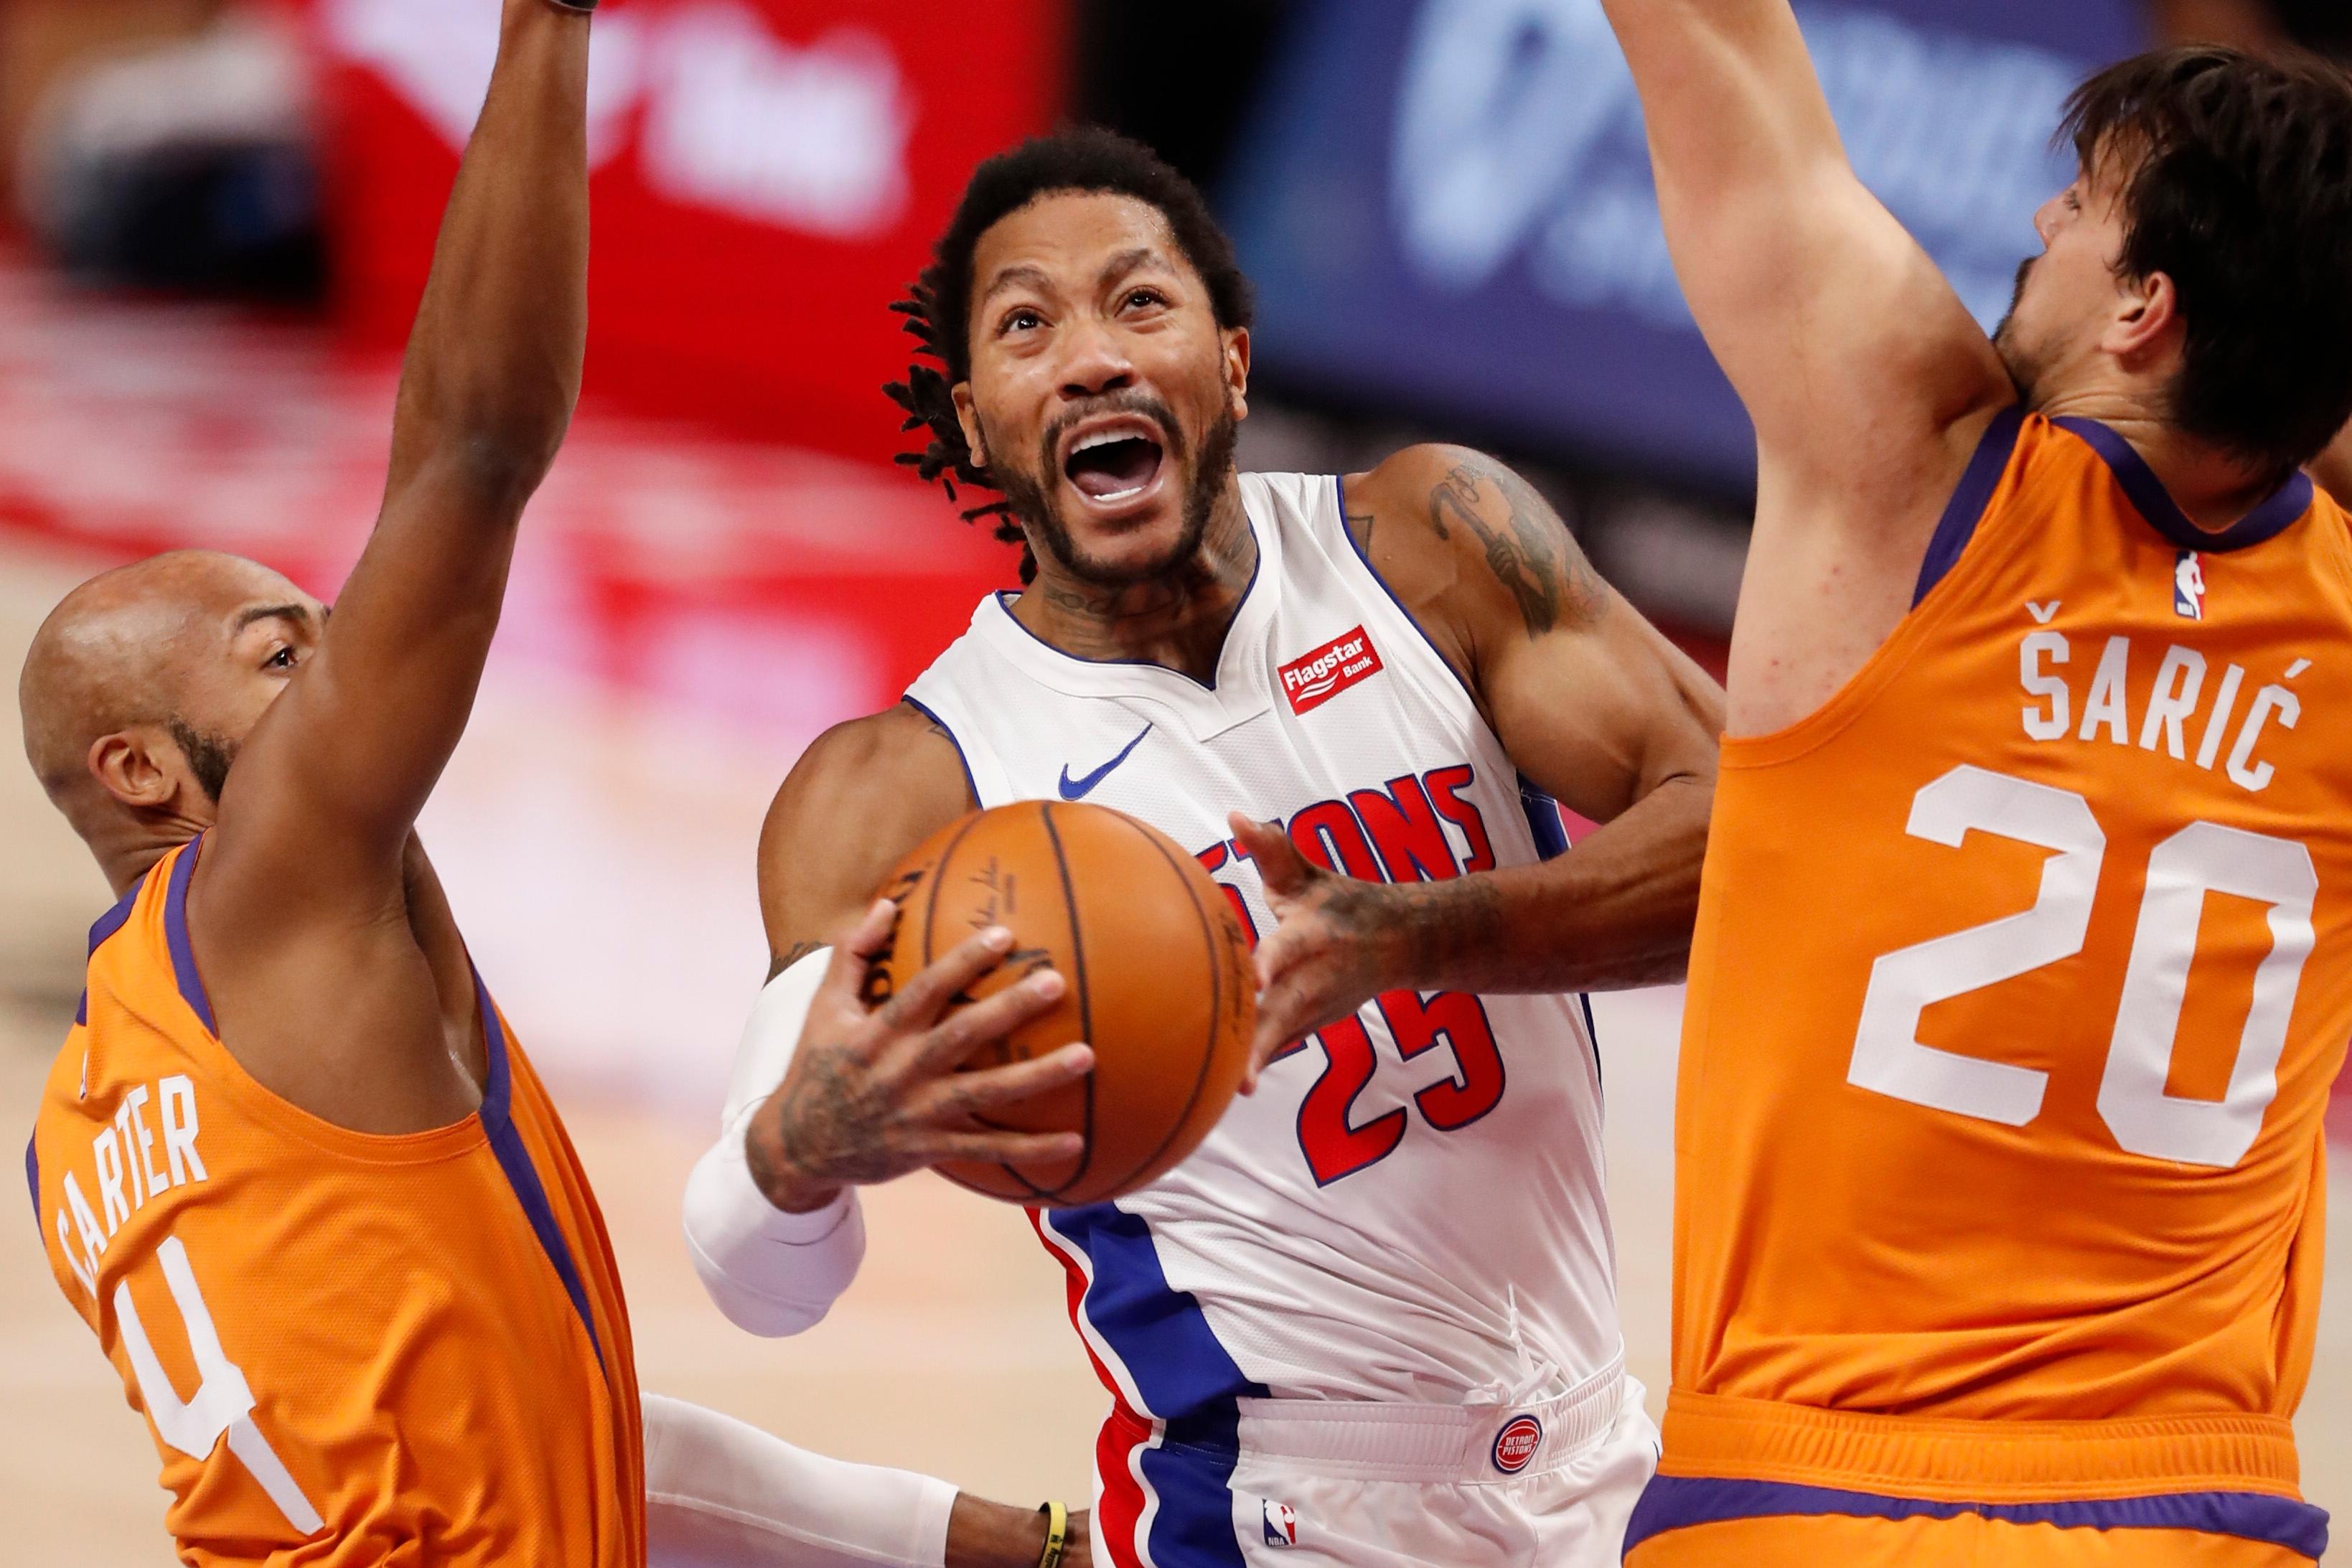 Jan 8, 2021; Detroit, Michigan, USA; Detroit Pistons guard Derrick Rose (25) goes up for a shot against Phoenix Suns guard Jevon Carter (4) and forward Dario Saric (20) during the second quarter at Little Caesars Arena. / Raj Mehta-USA TODAY Sports